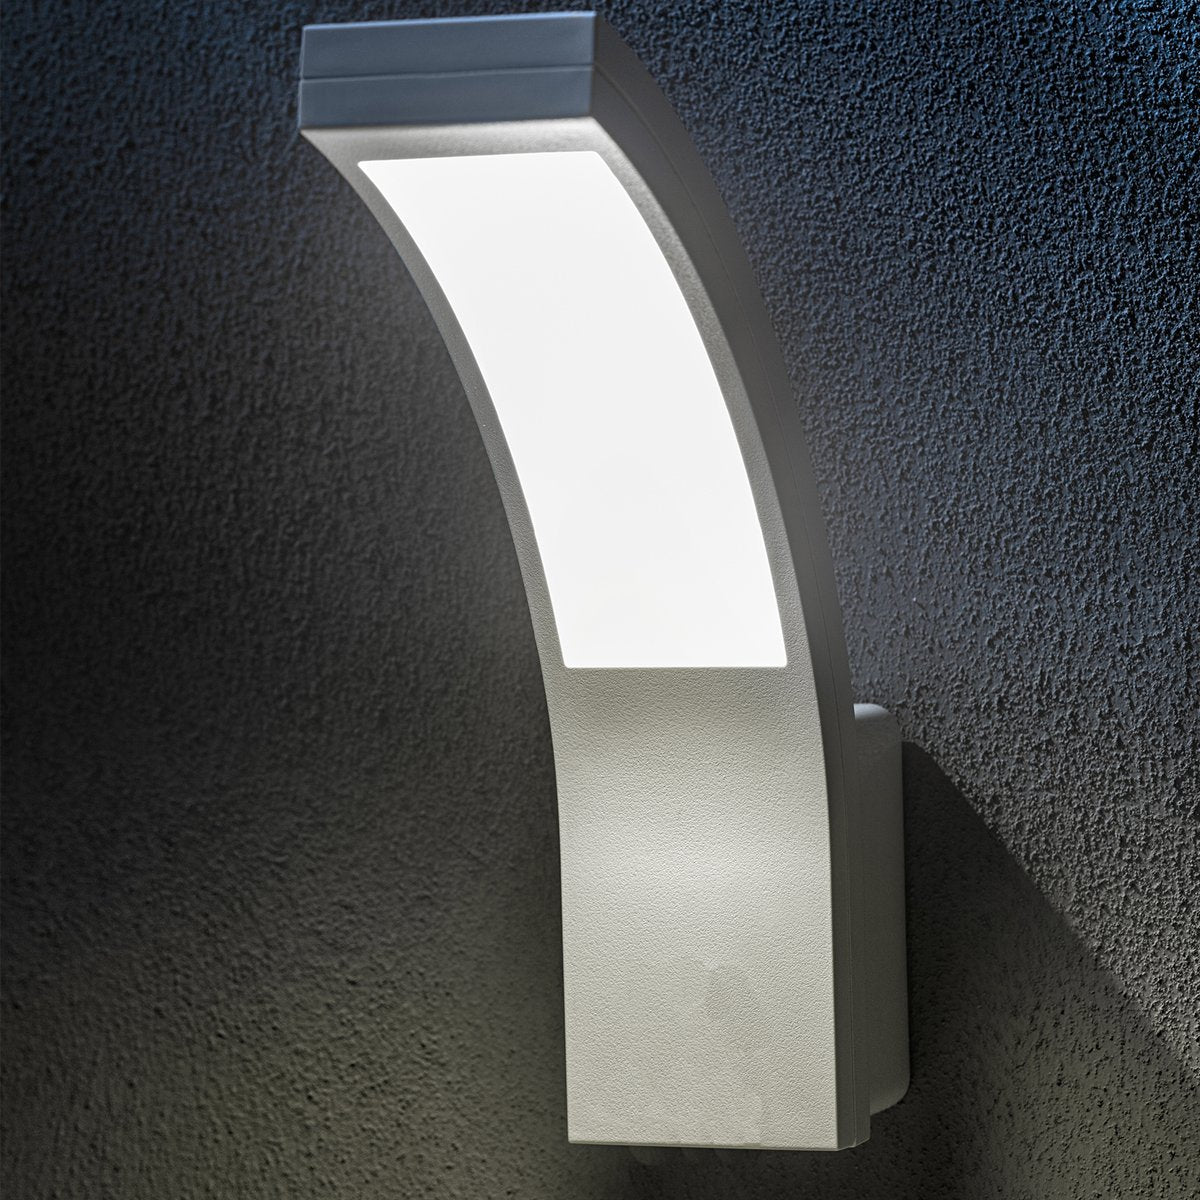 Paris has been designed for use outdoors. It features IP code IP54, which means that the light is protected from dirt and moisture. This LED outdoor wall light is simple and modern in design to create a minimalist light. The LEDs are housed behind an opal white panel made of polycarbonate. 